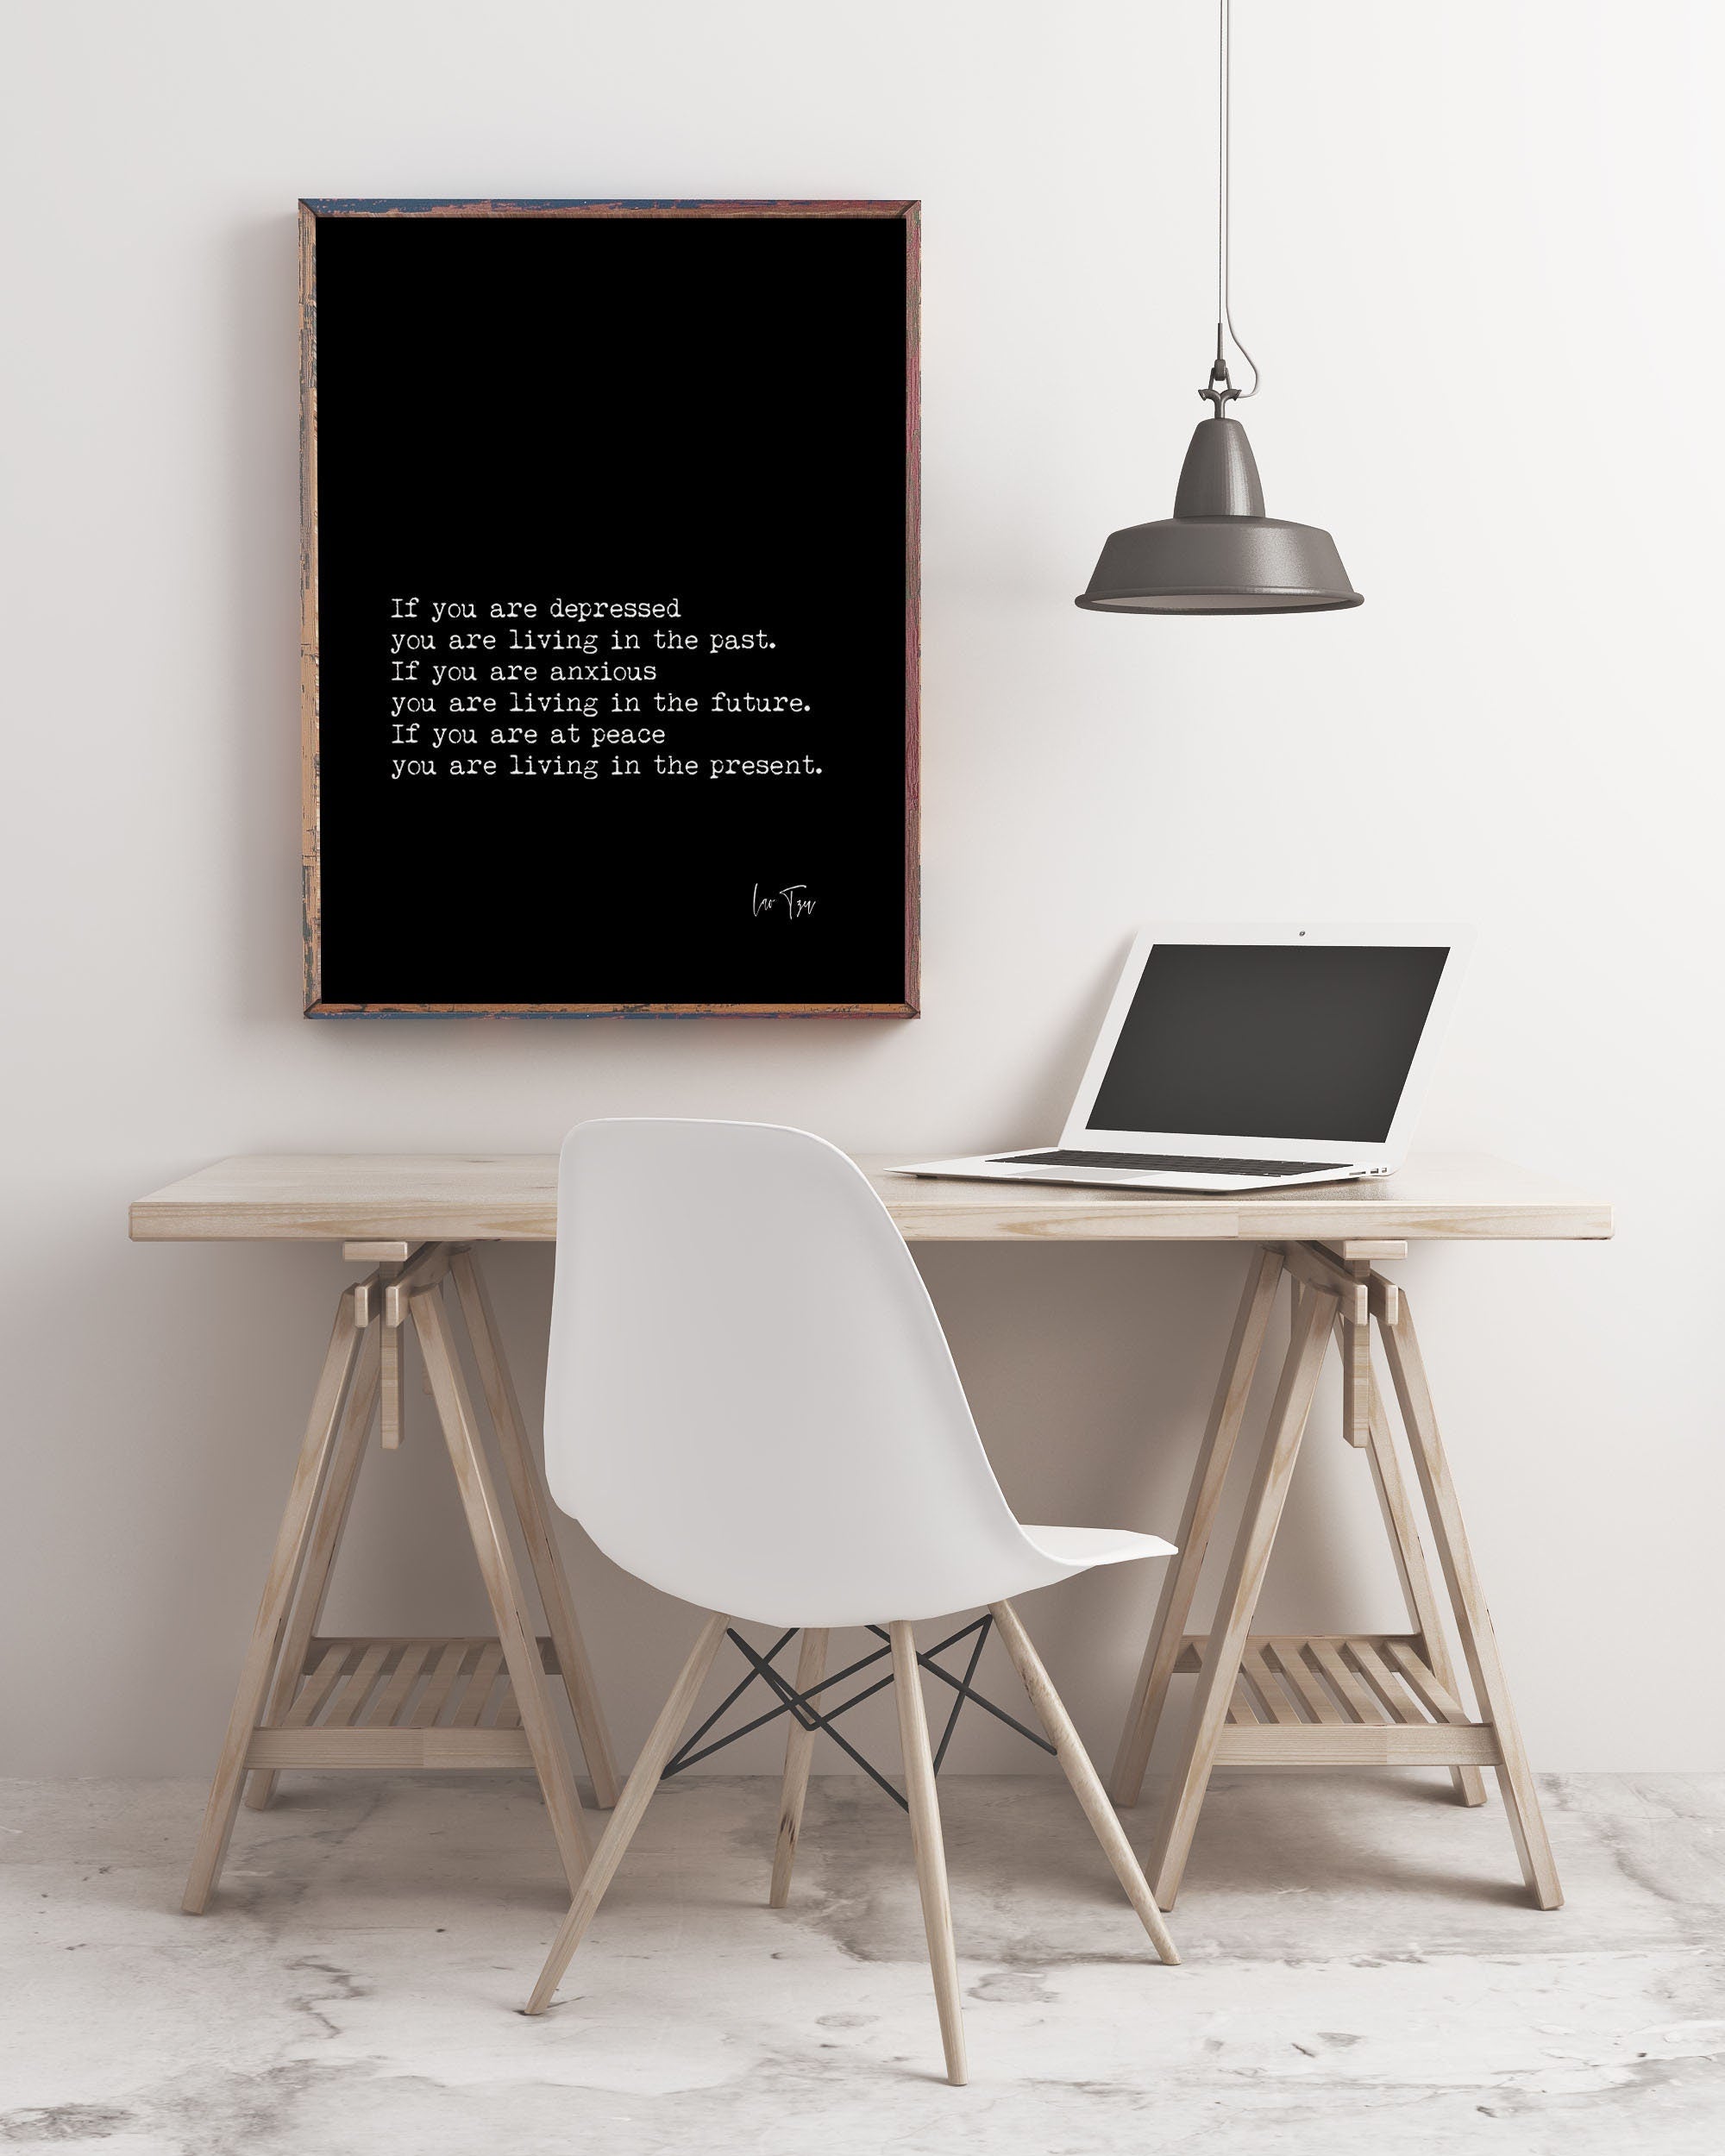 Lao Tzu Peace Wall Art Prints in Black and White - If You Are At Peace You Are Living In The Present - Unframed or Framed Art